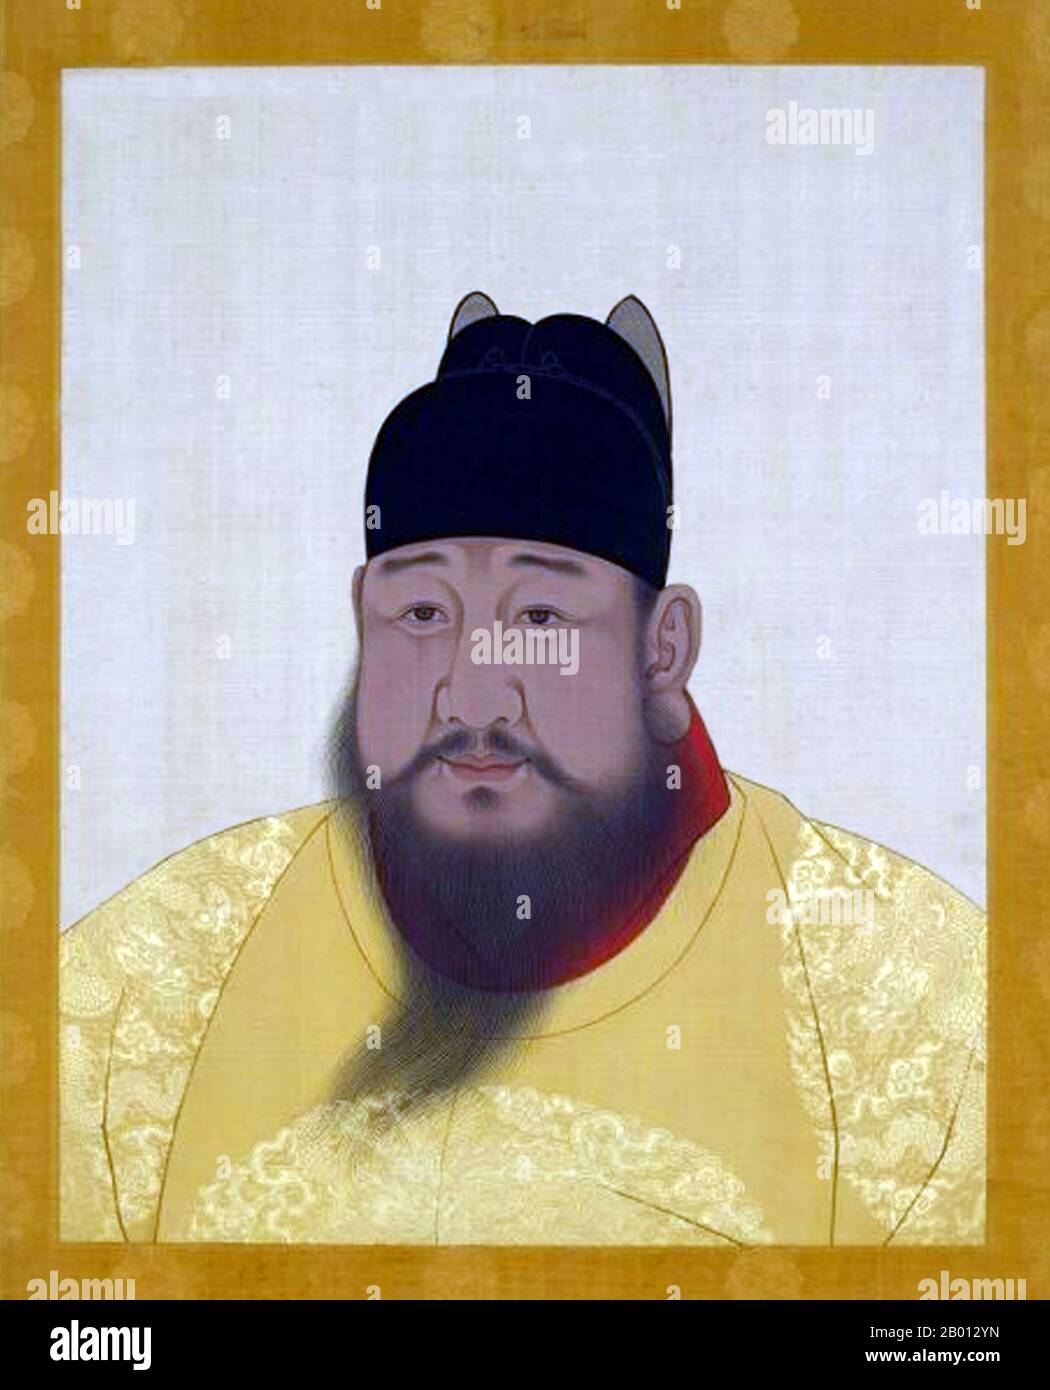 China: Emperor Xuande, 5th ruler of the Ming Dynasty (r. 1425-1435). Hanging scroll painting, 15th-17th century.  The Xuande Emperor (1399-1435), personal name Zhu Zhani and temple name Xuanzong, was the 5th emperor of Ming China. His era name means 'Proclamation of Virtue'. The Xuande Emperor ruled over a remarkably peaceful time with no significant external or internal problems. Later historians have considered his reign to be the Ming dynasty's golden age. Stock Photo